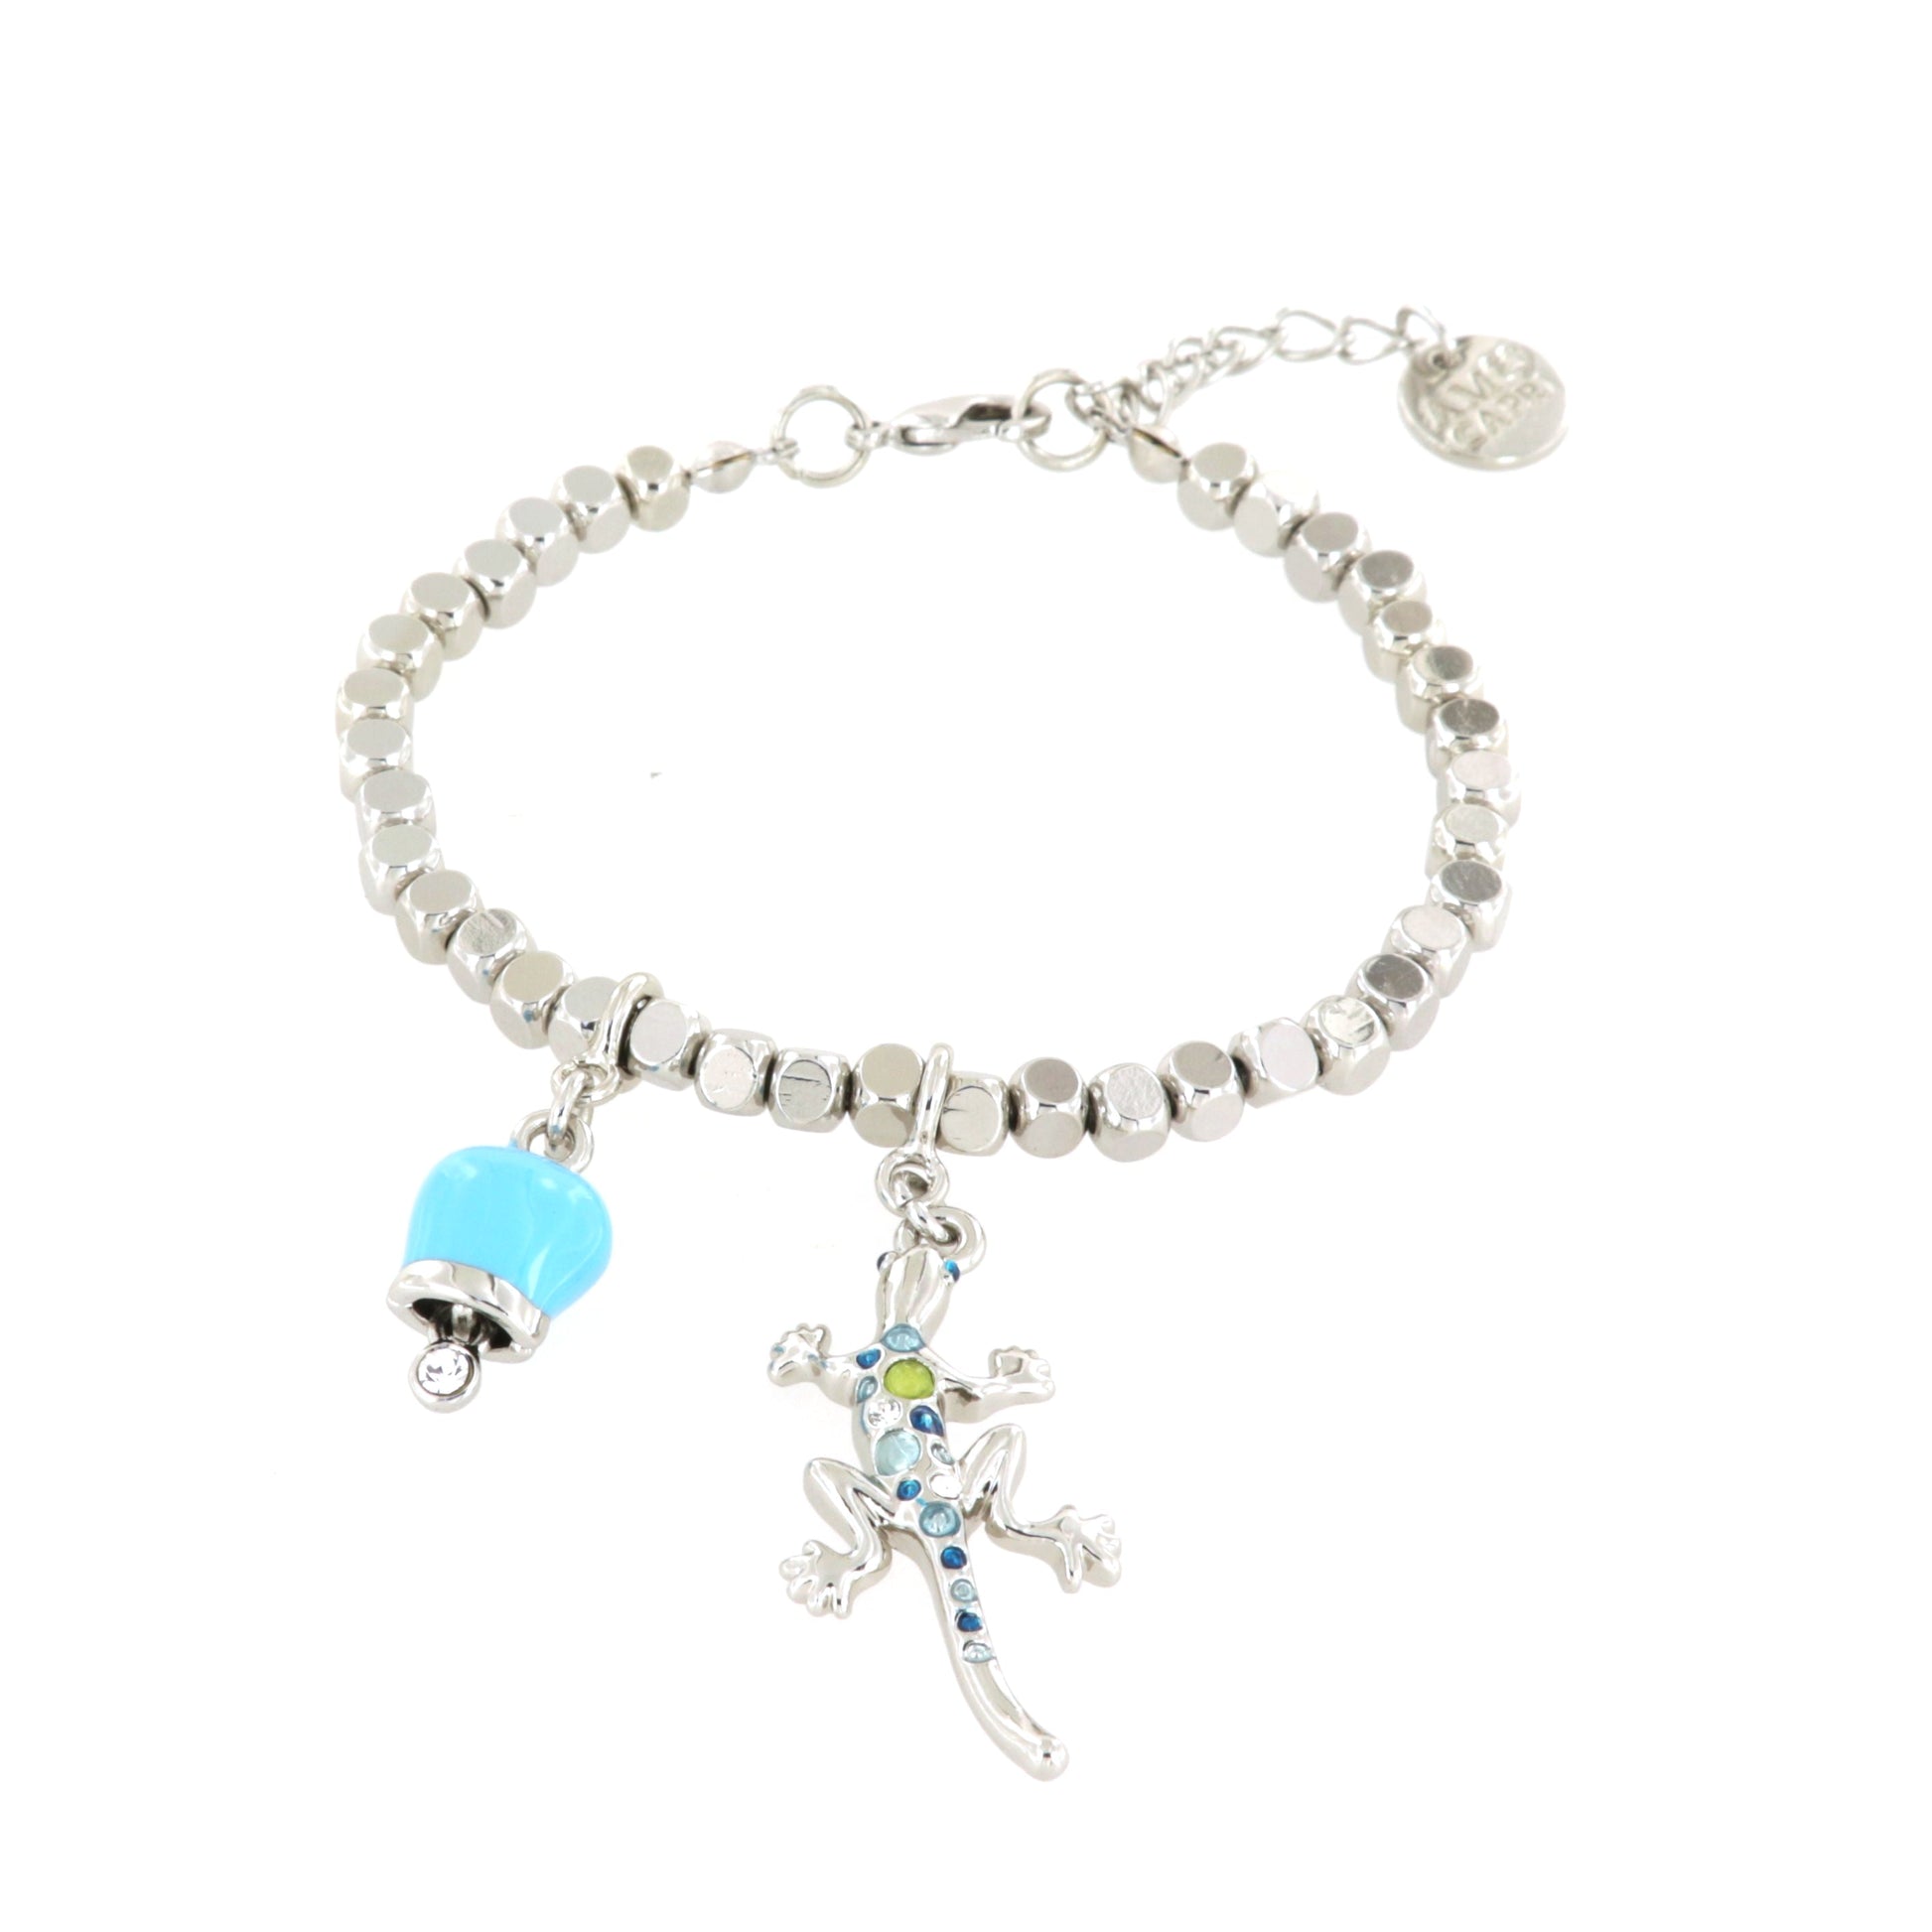 Metal bracelet with gecko pendant embellished with multicolored crystals and skewer bells in turquoise enamel